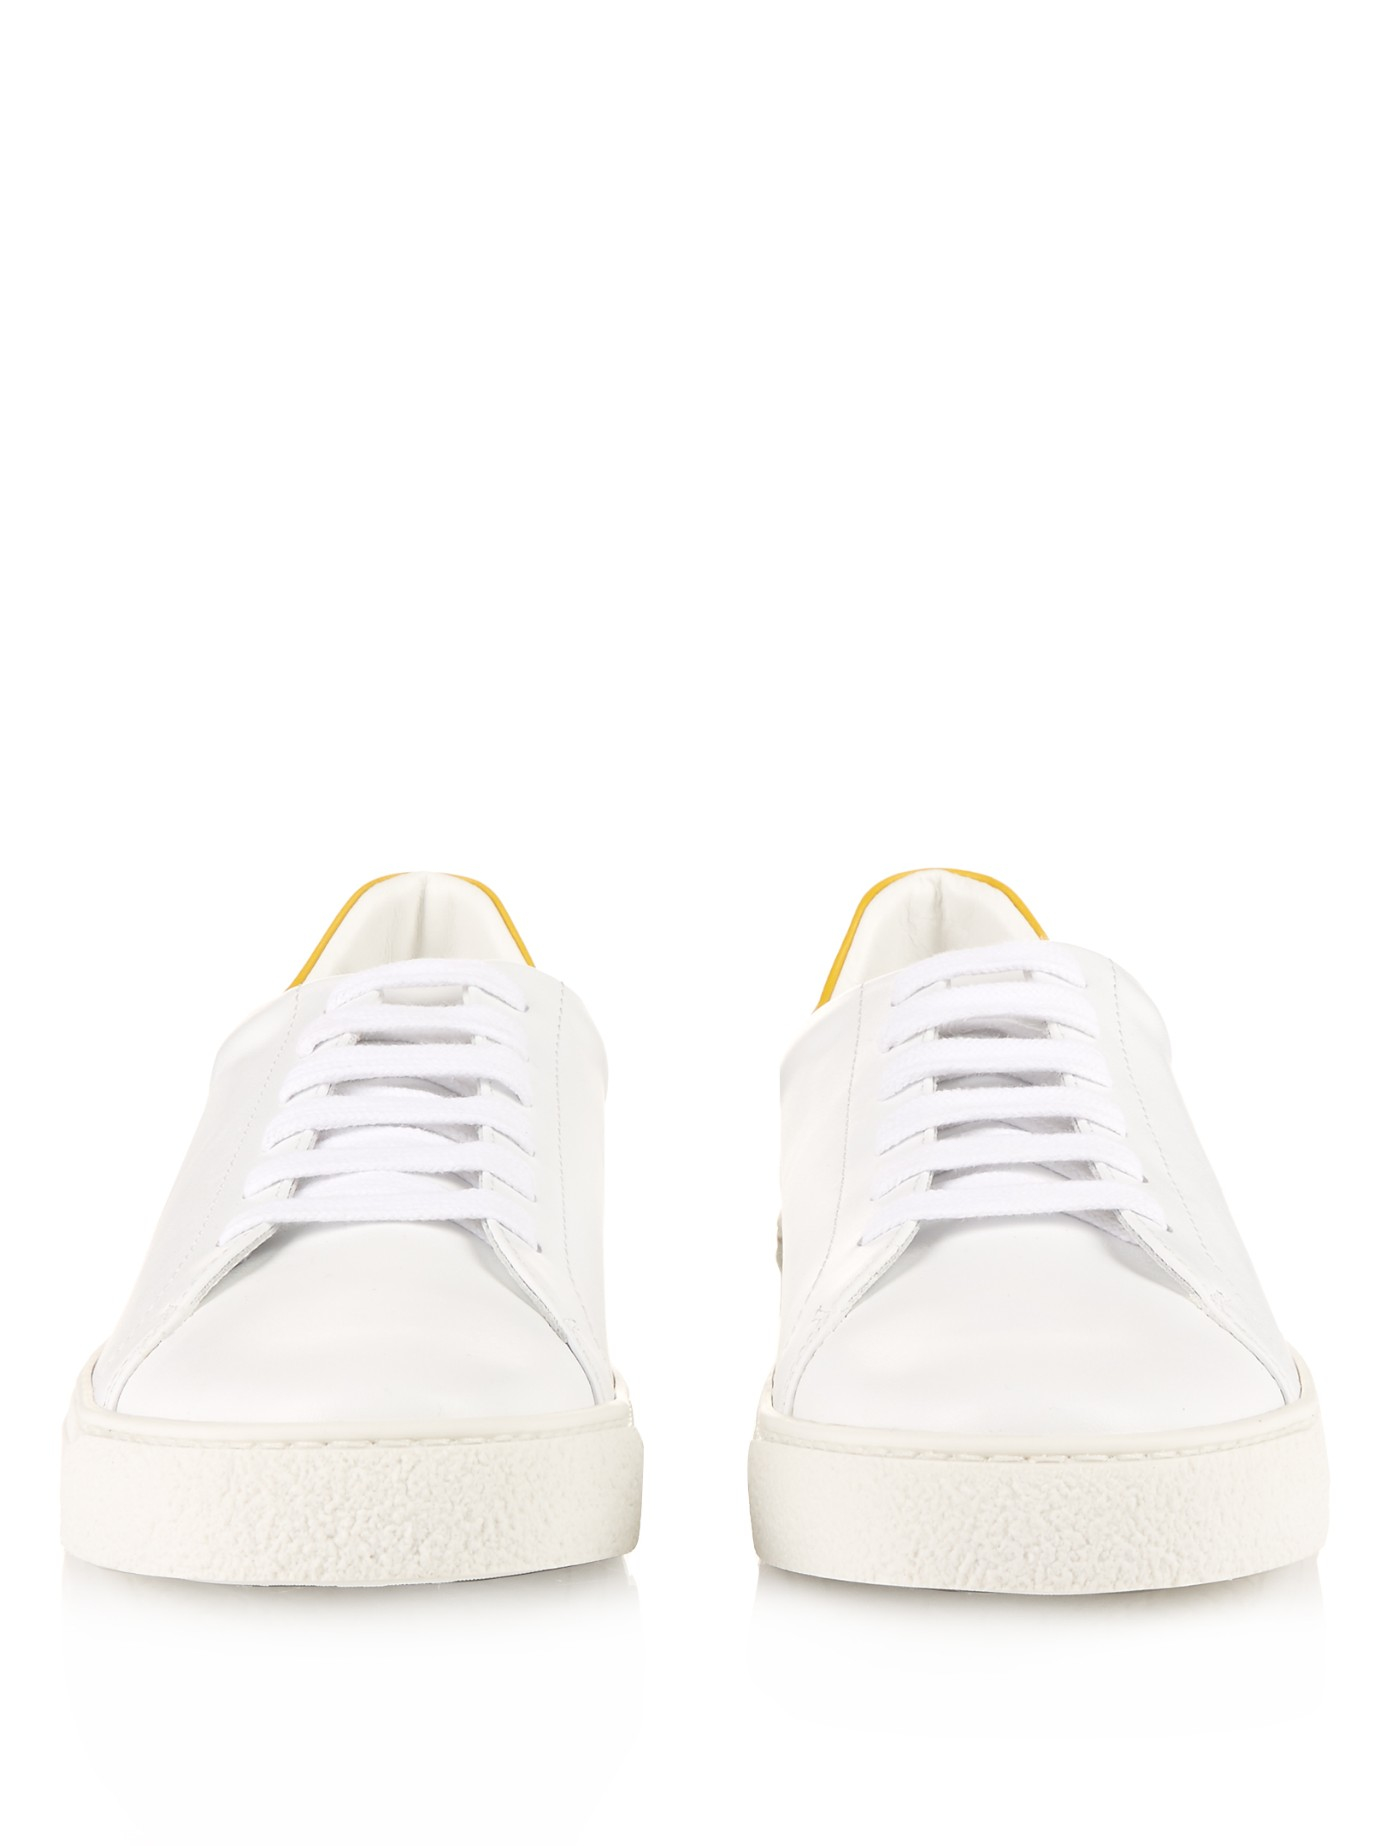 Anya Hindmarch Wink Tennis Leather Sneakers in White | Lyst UK